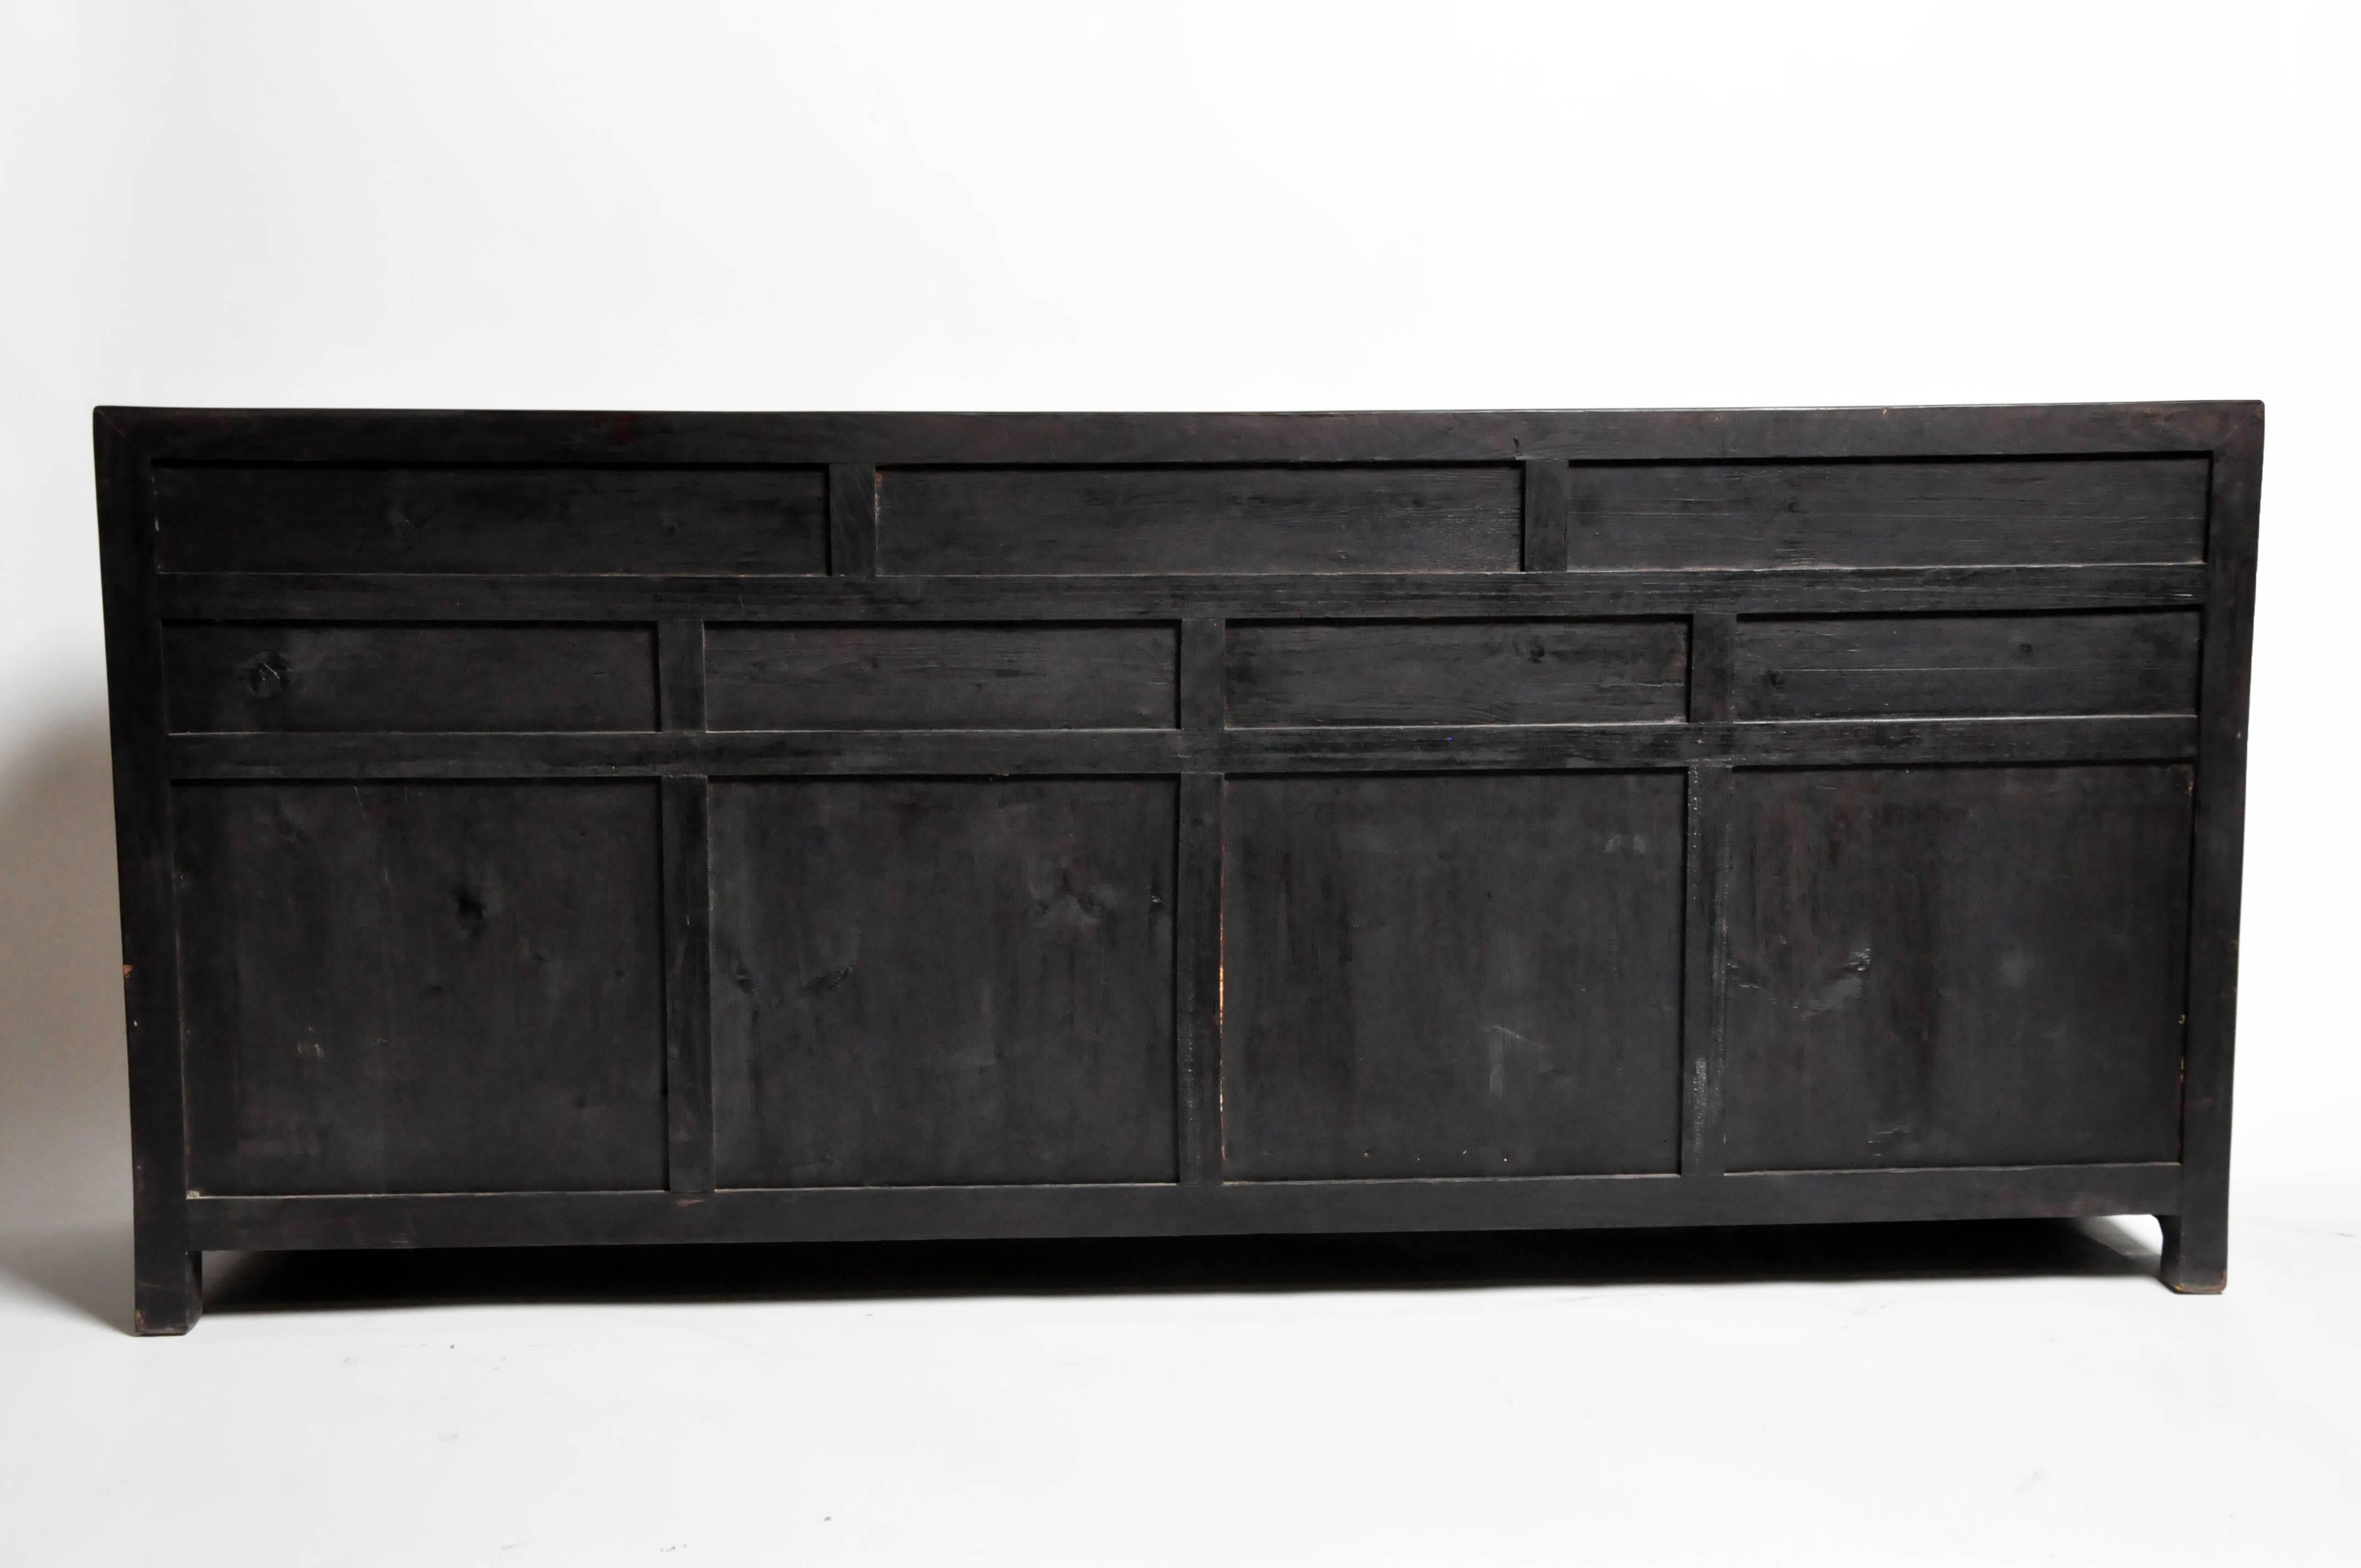 This handsome sideboard is from Hebei, China and was made from reclaimed elm wood. The piece features mortise and tenon joinery, seven drawers, and a shelf for additional storage. You can also customize it and make your own. Wood, color, finish, and